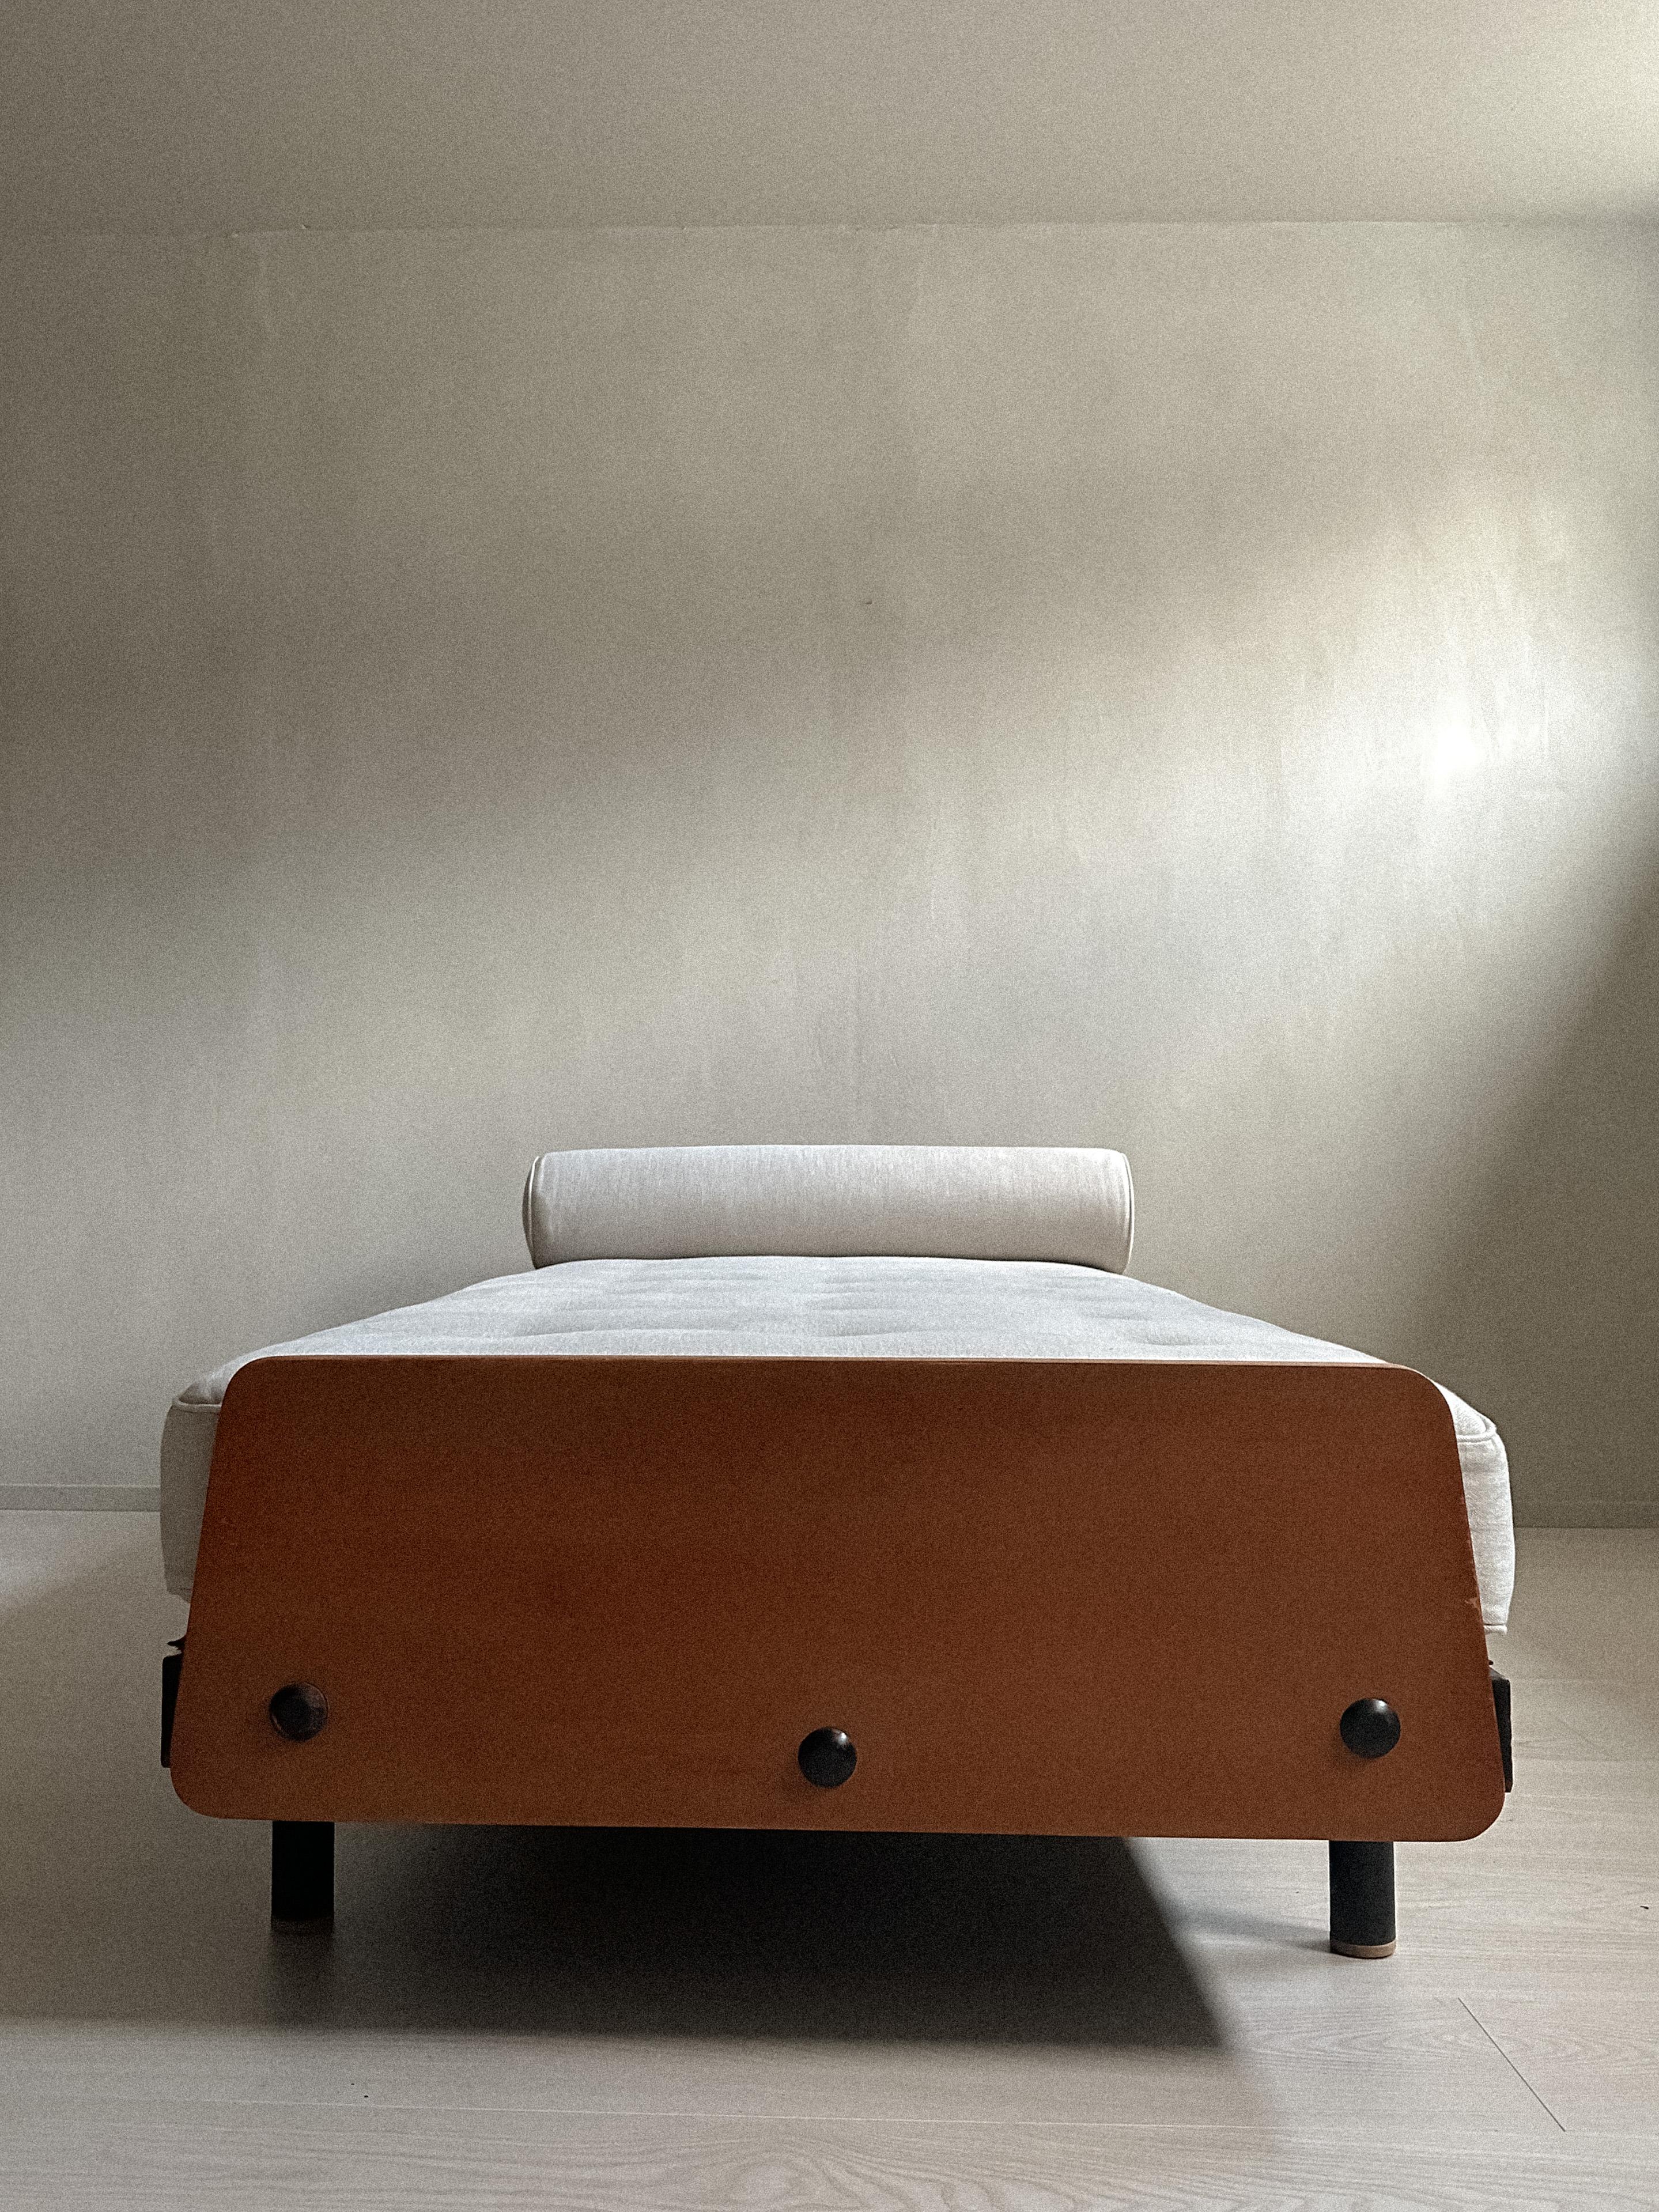 jean prouve daybed